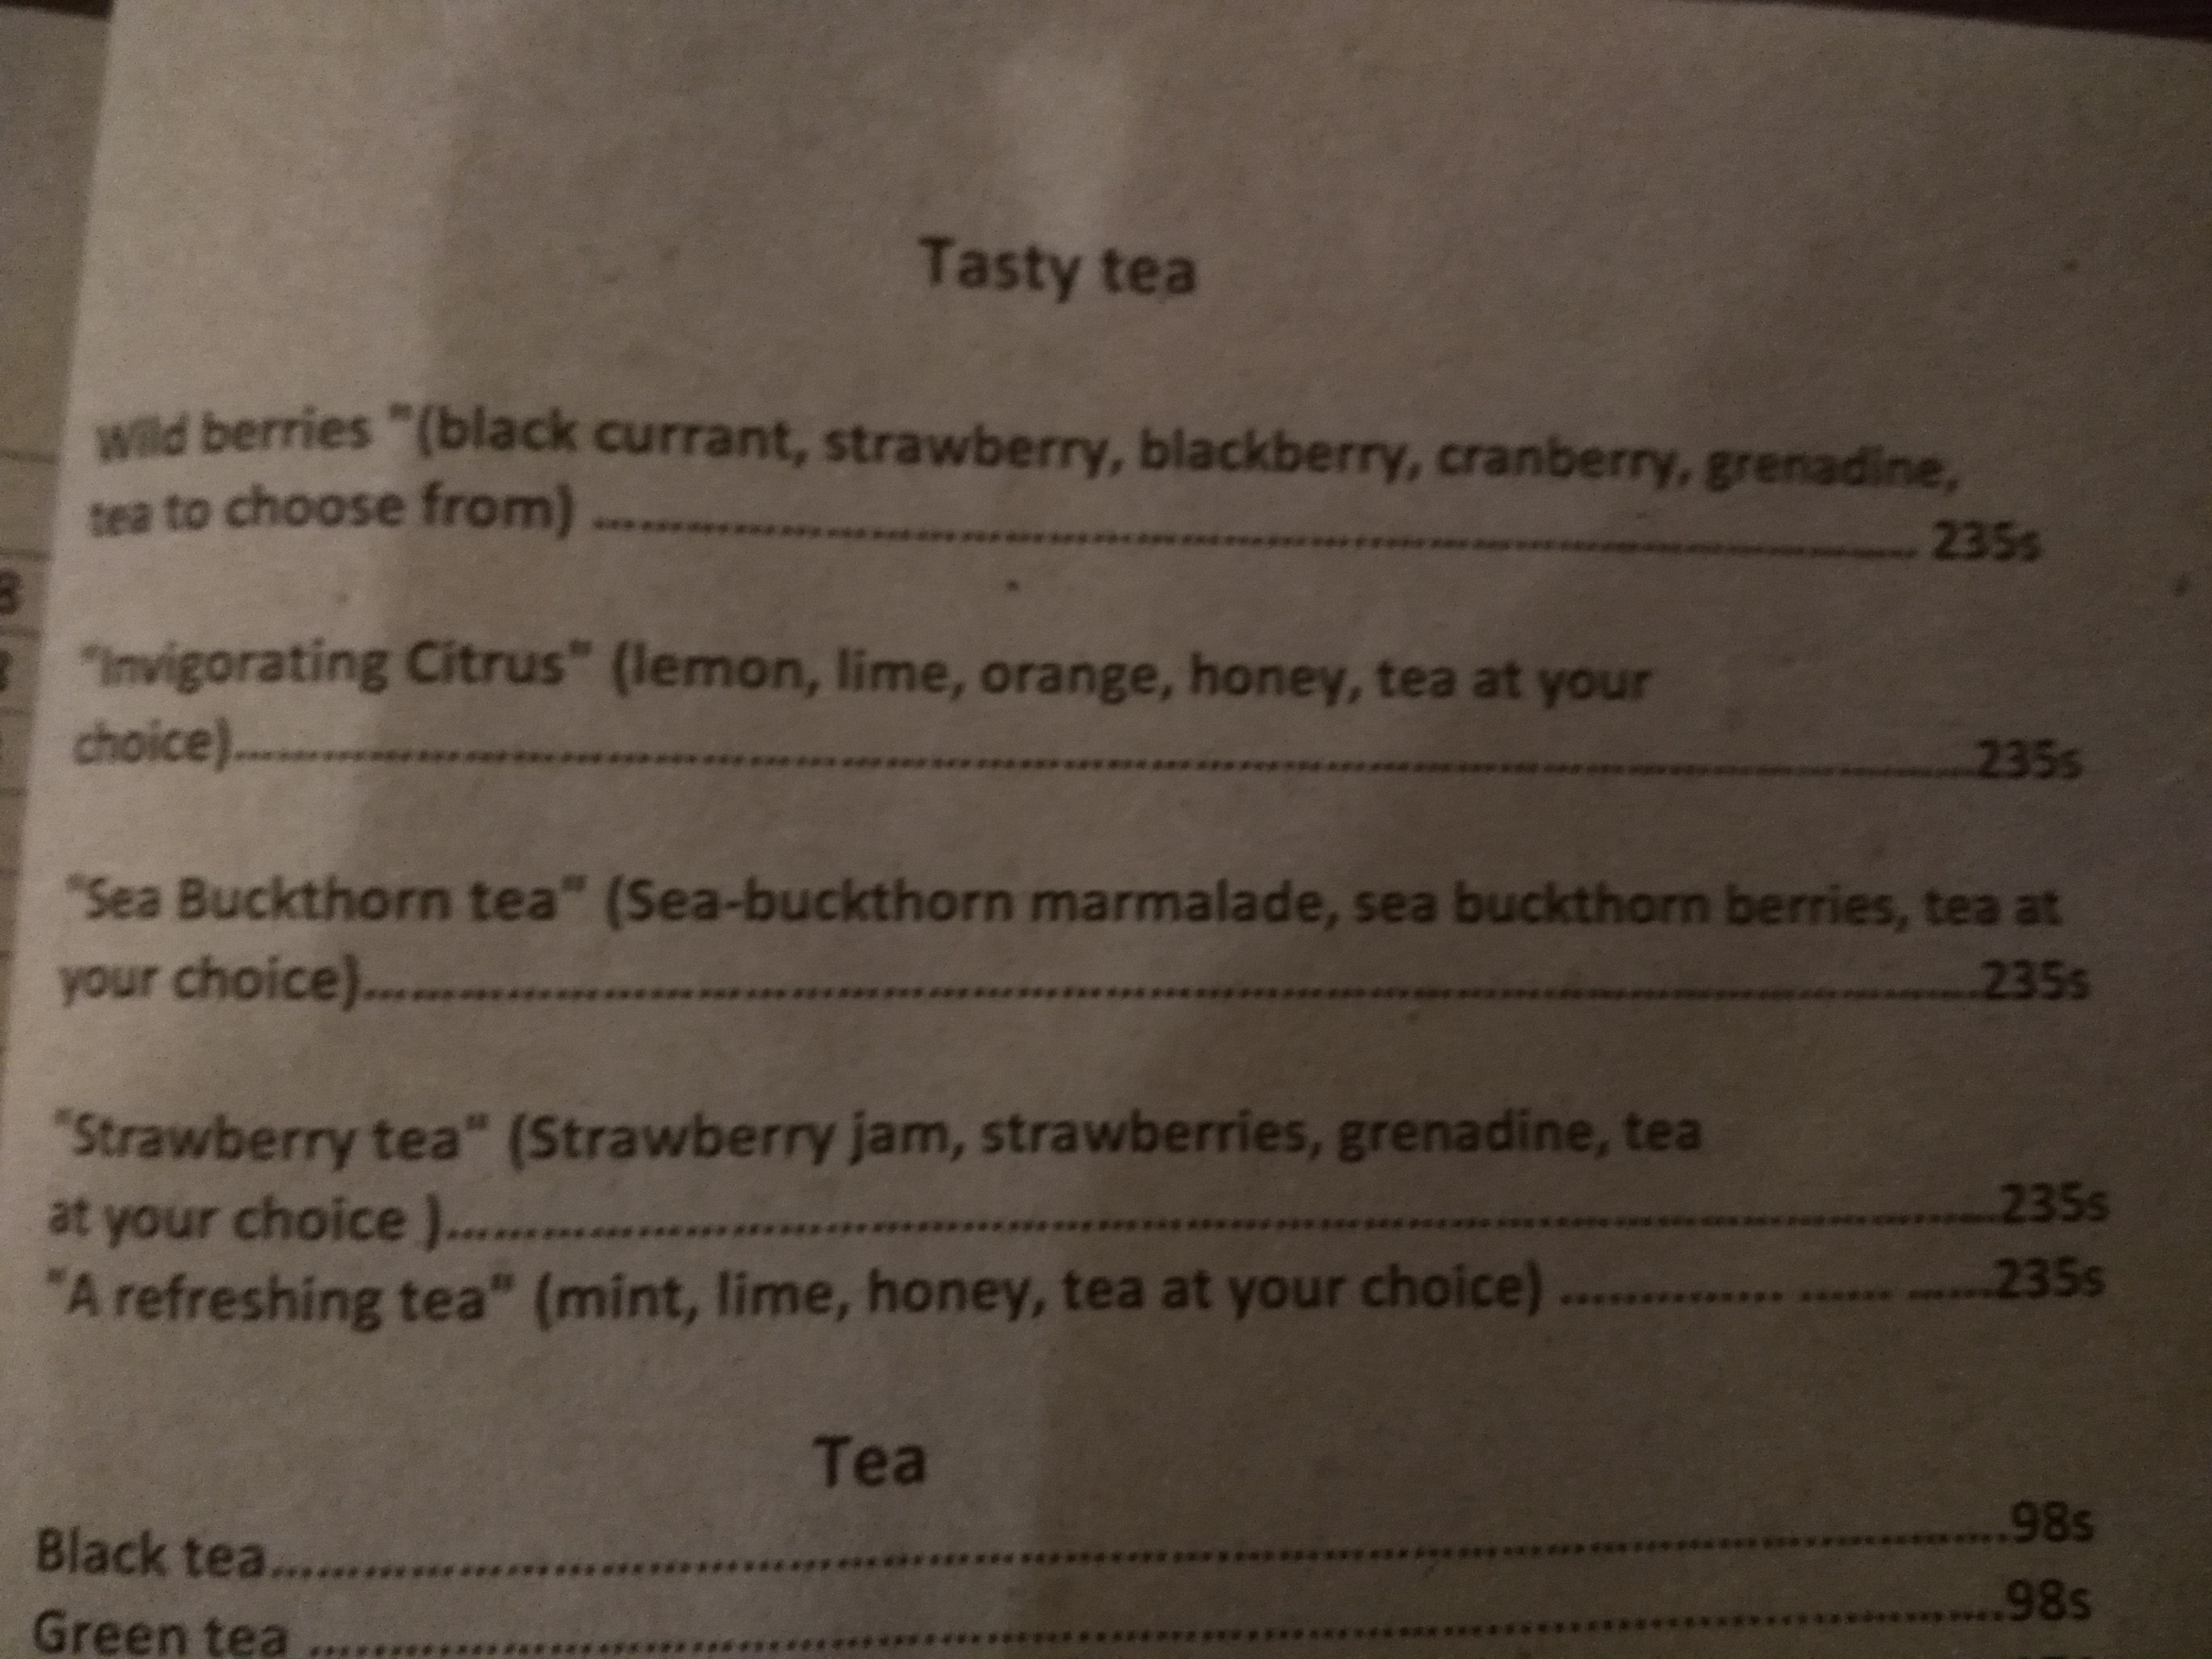 Shout out to this restaurant's menu making a distinction between tasty tea and tea. I think I'll have tasty tea, please.